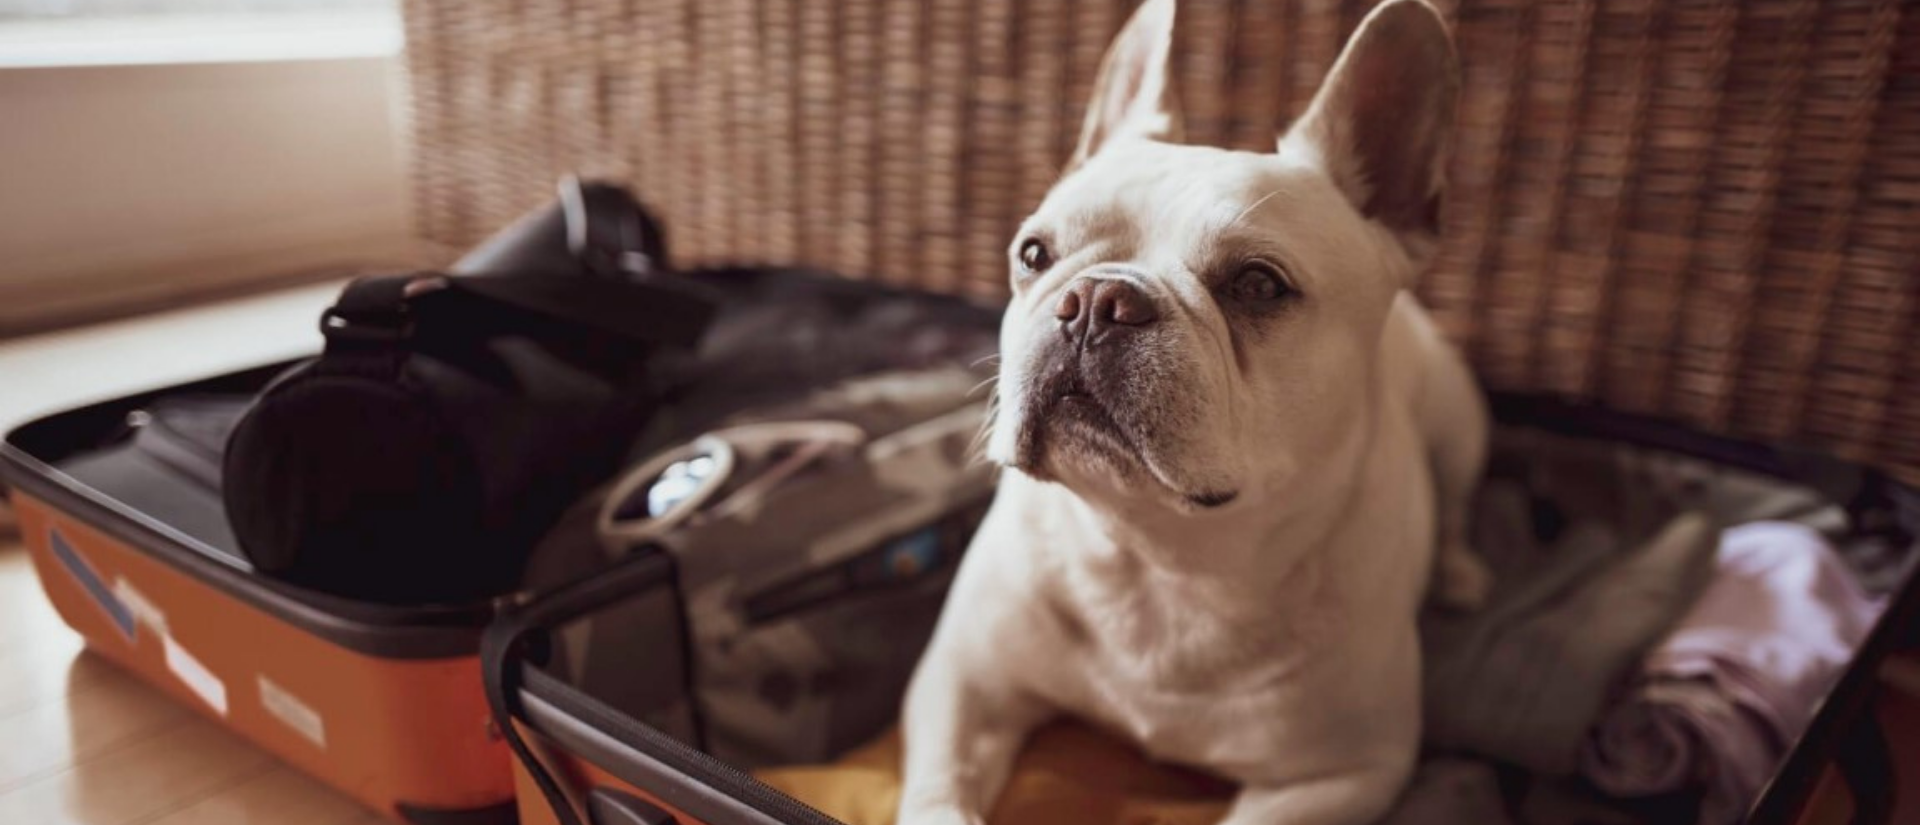 7 Tips for Pet-Friendly Travel & Pet-Friendly Vacations